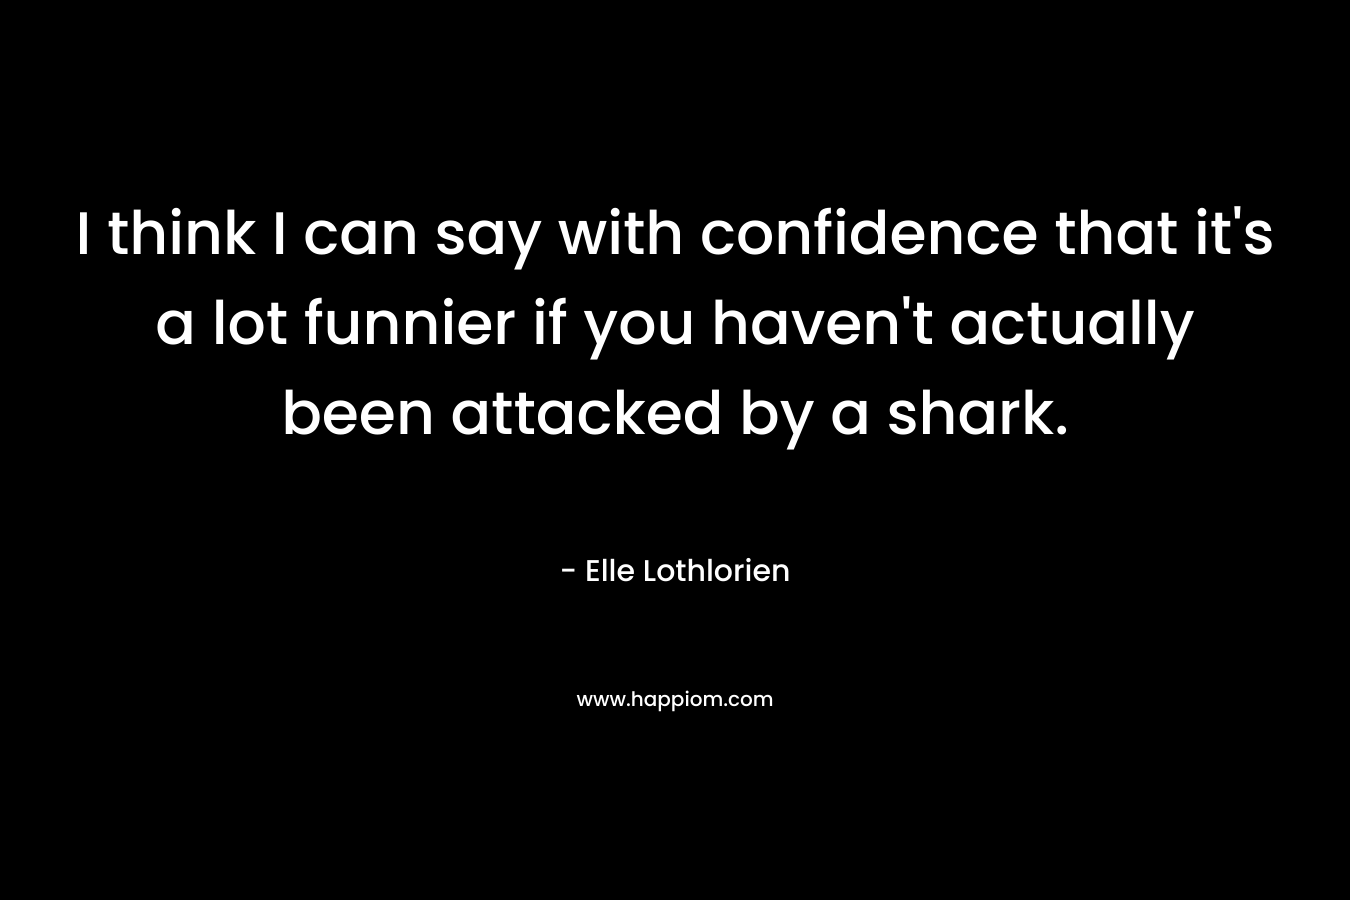 I think I can say with confidence that it's a lot funnier if you haven't actually been attacked by a shark.